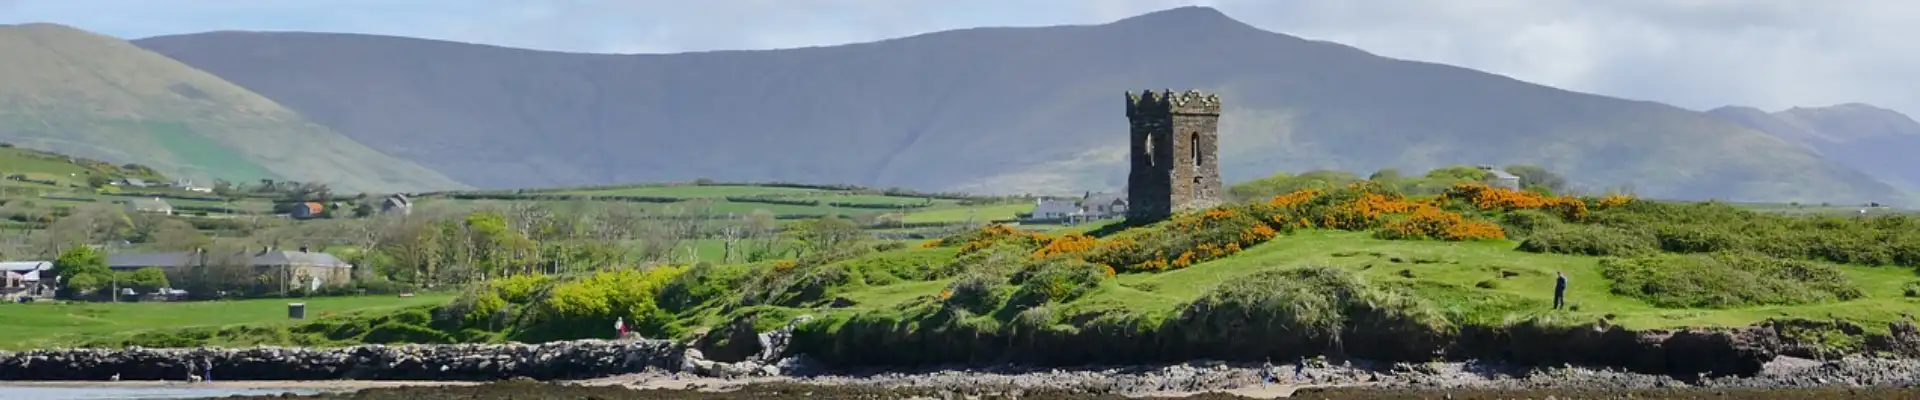 View of tower in Ireland